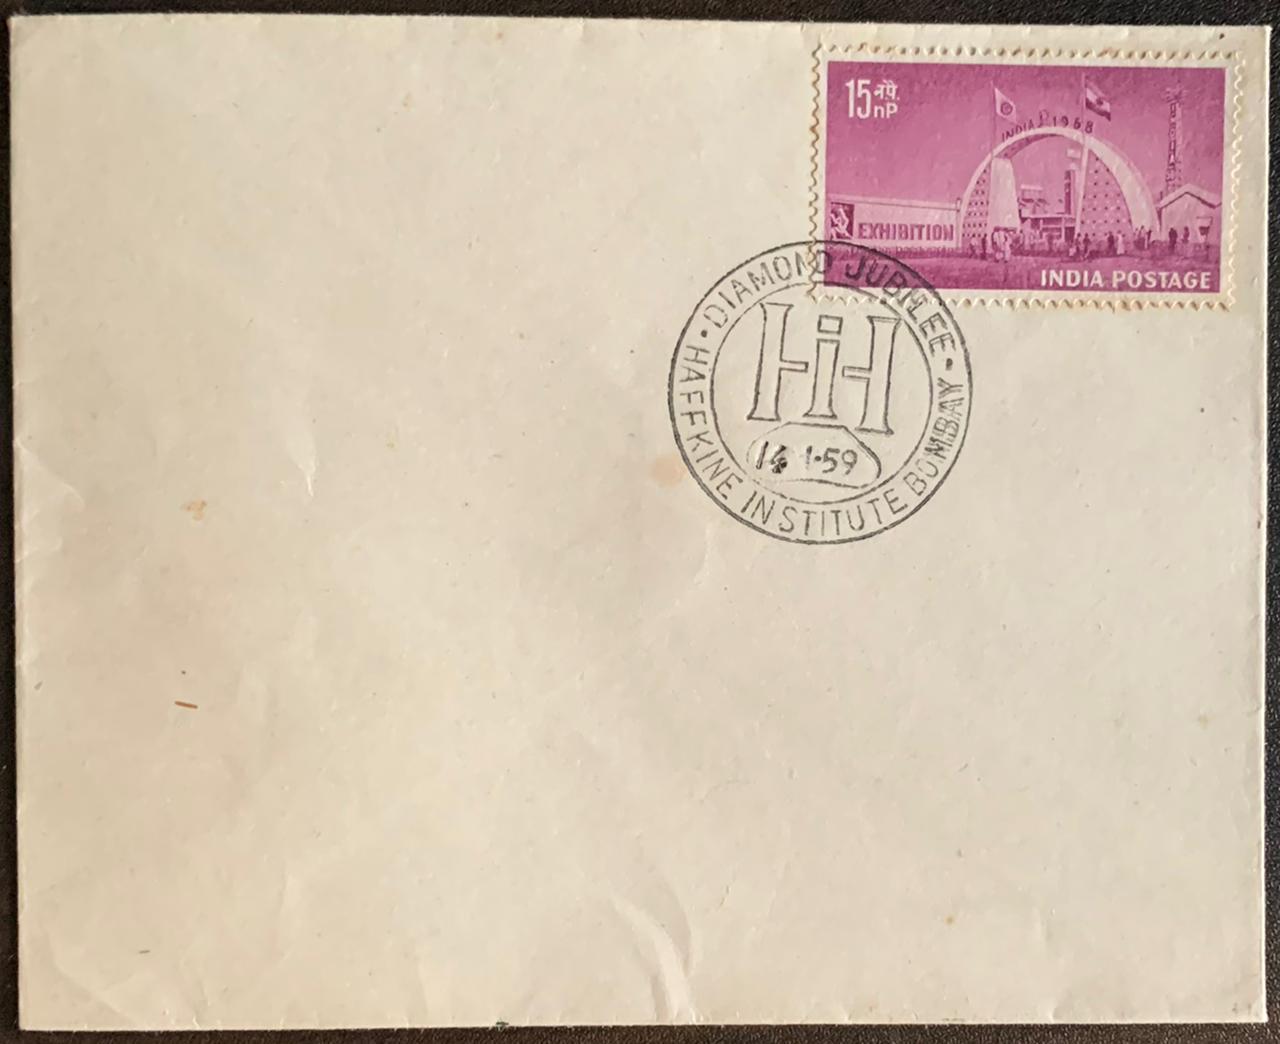 India 1958 Diamond Jubilee of Haffkine Institute Biology Special Cancellation